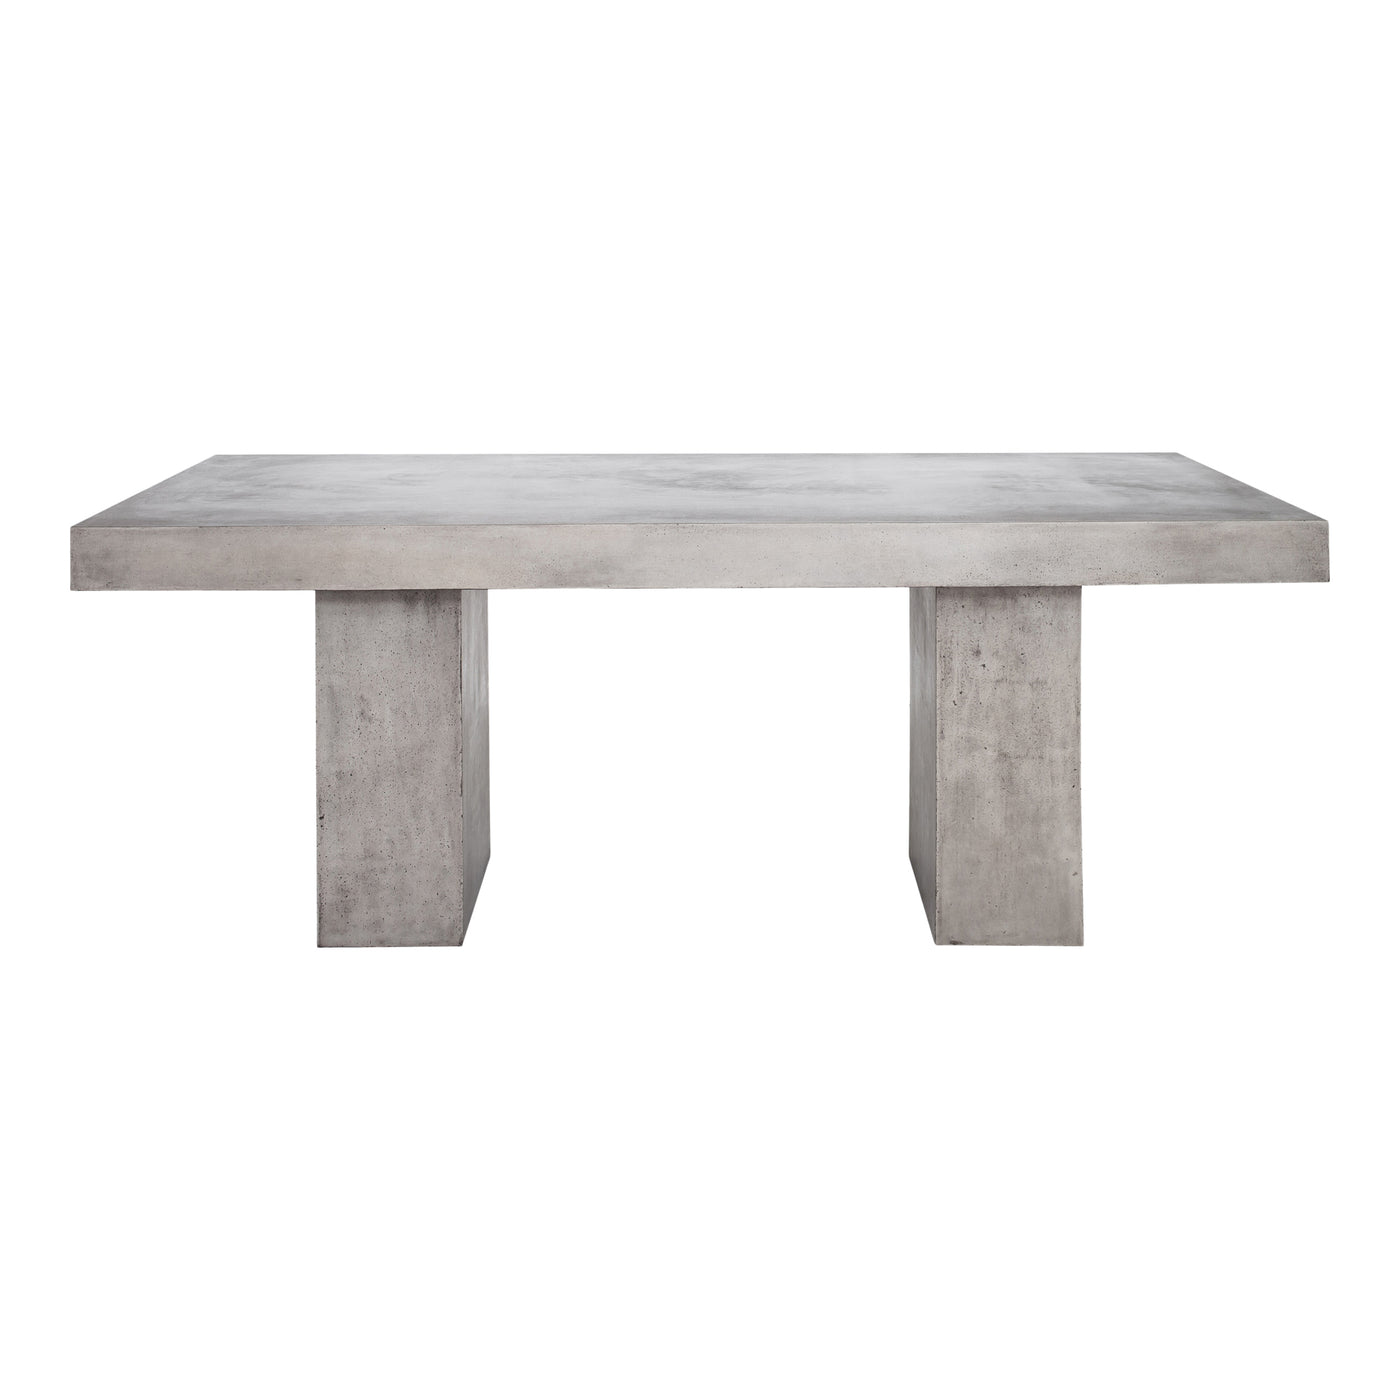 Our outdoor tables are made with a high quality concrete and fiber mix, to give them the cool, modern look you want, but k...